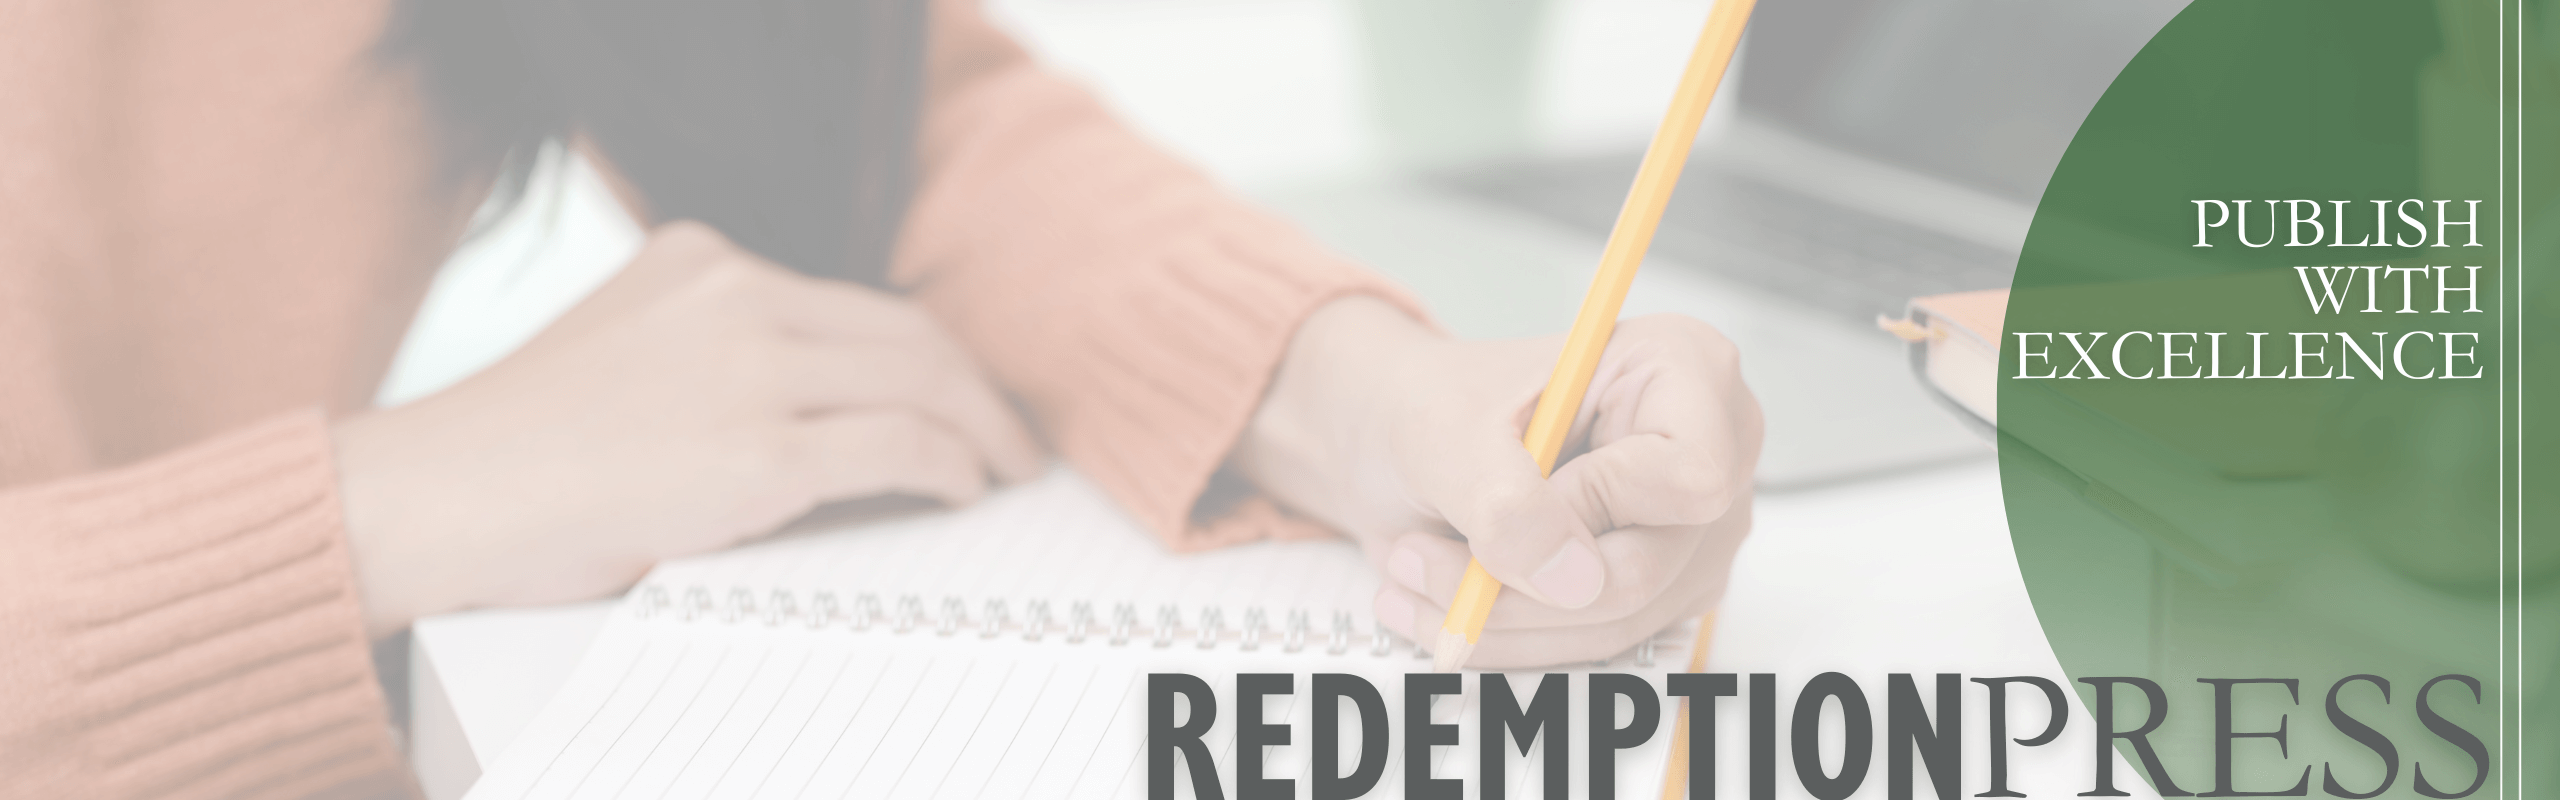 Redemption Press - Publish with Excellence